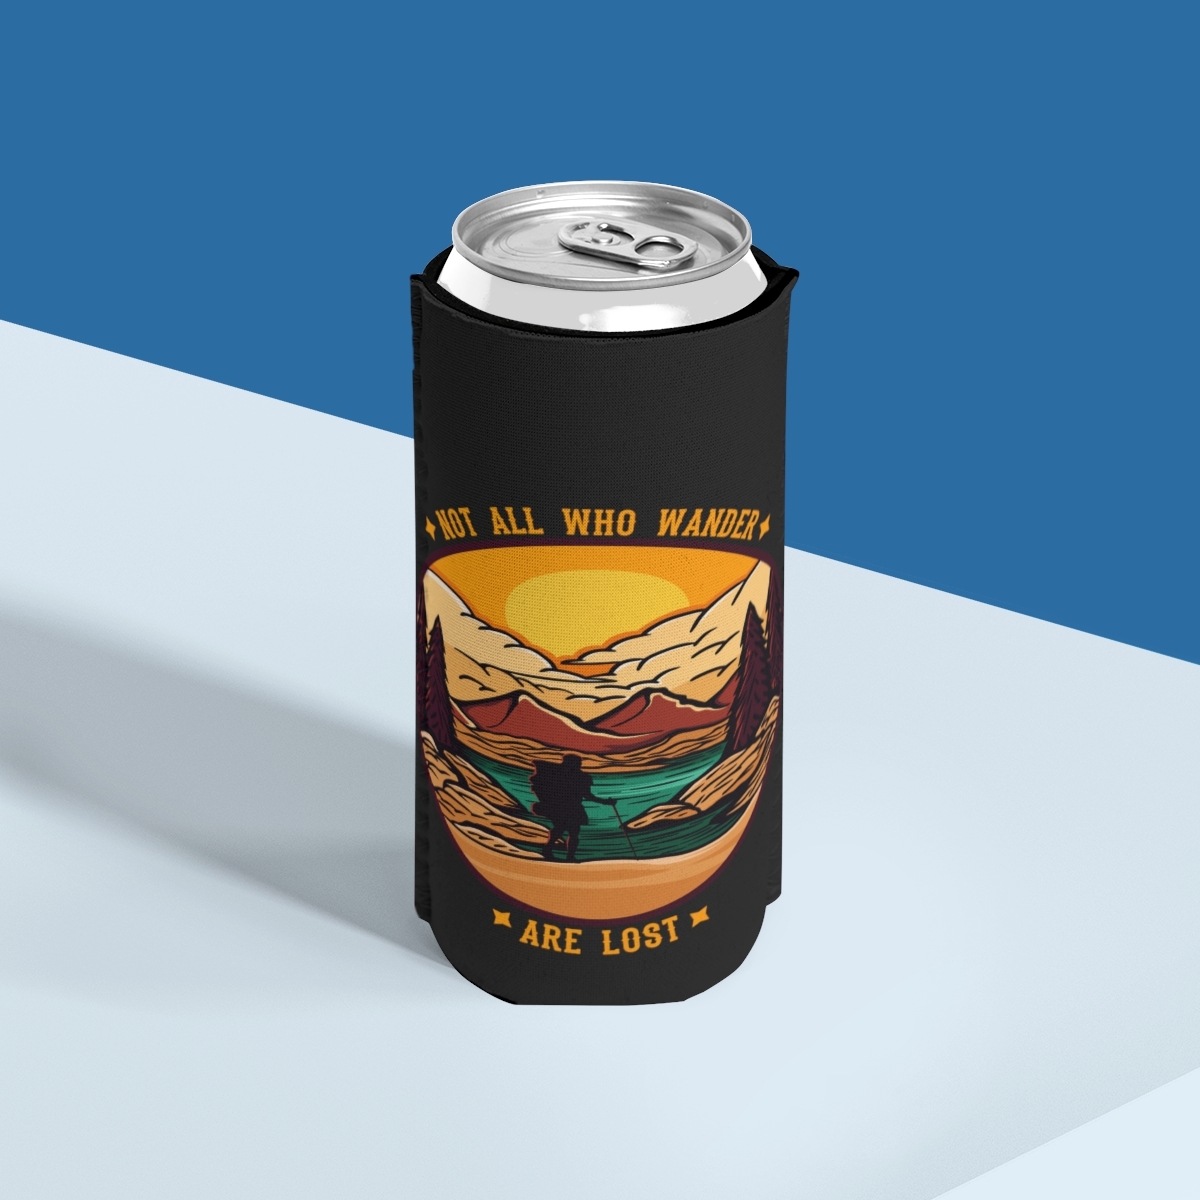 Retro Wanderlust Slim Can Cooler: Keep Your Drinks Cool and Embrace Adventure - $15.45